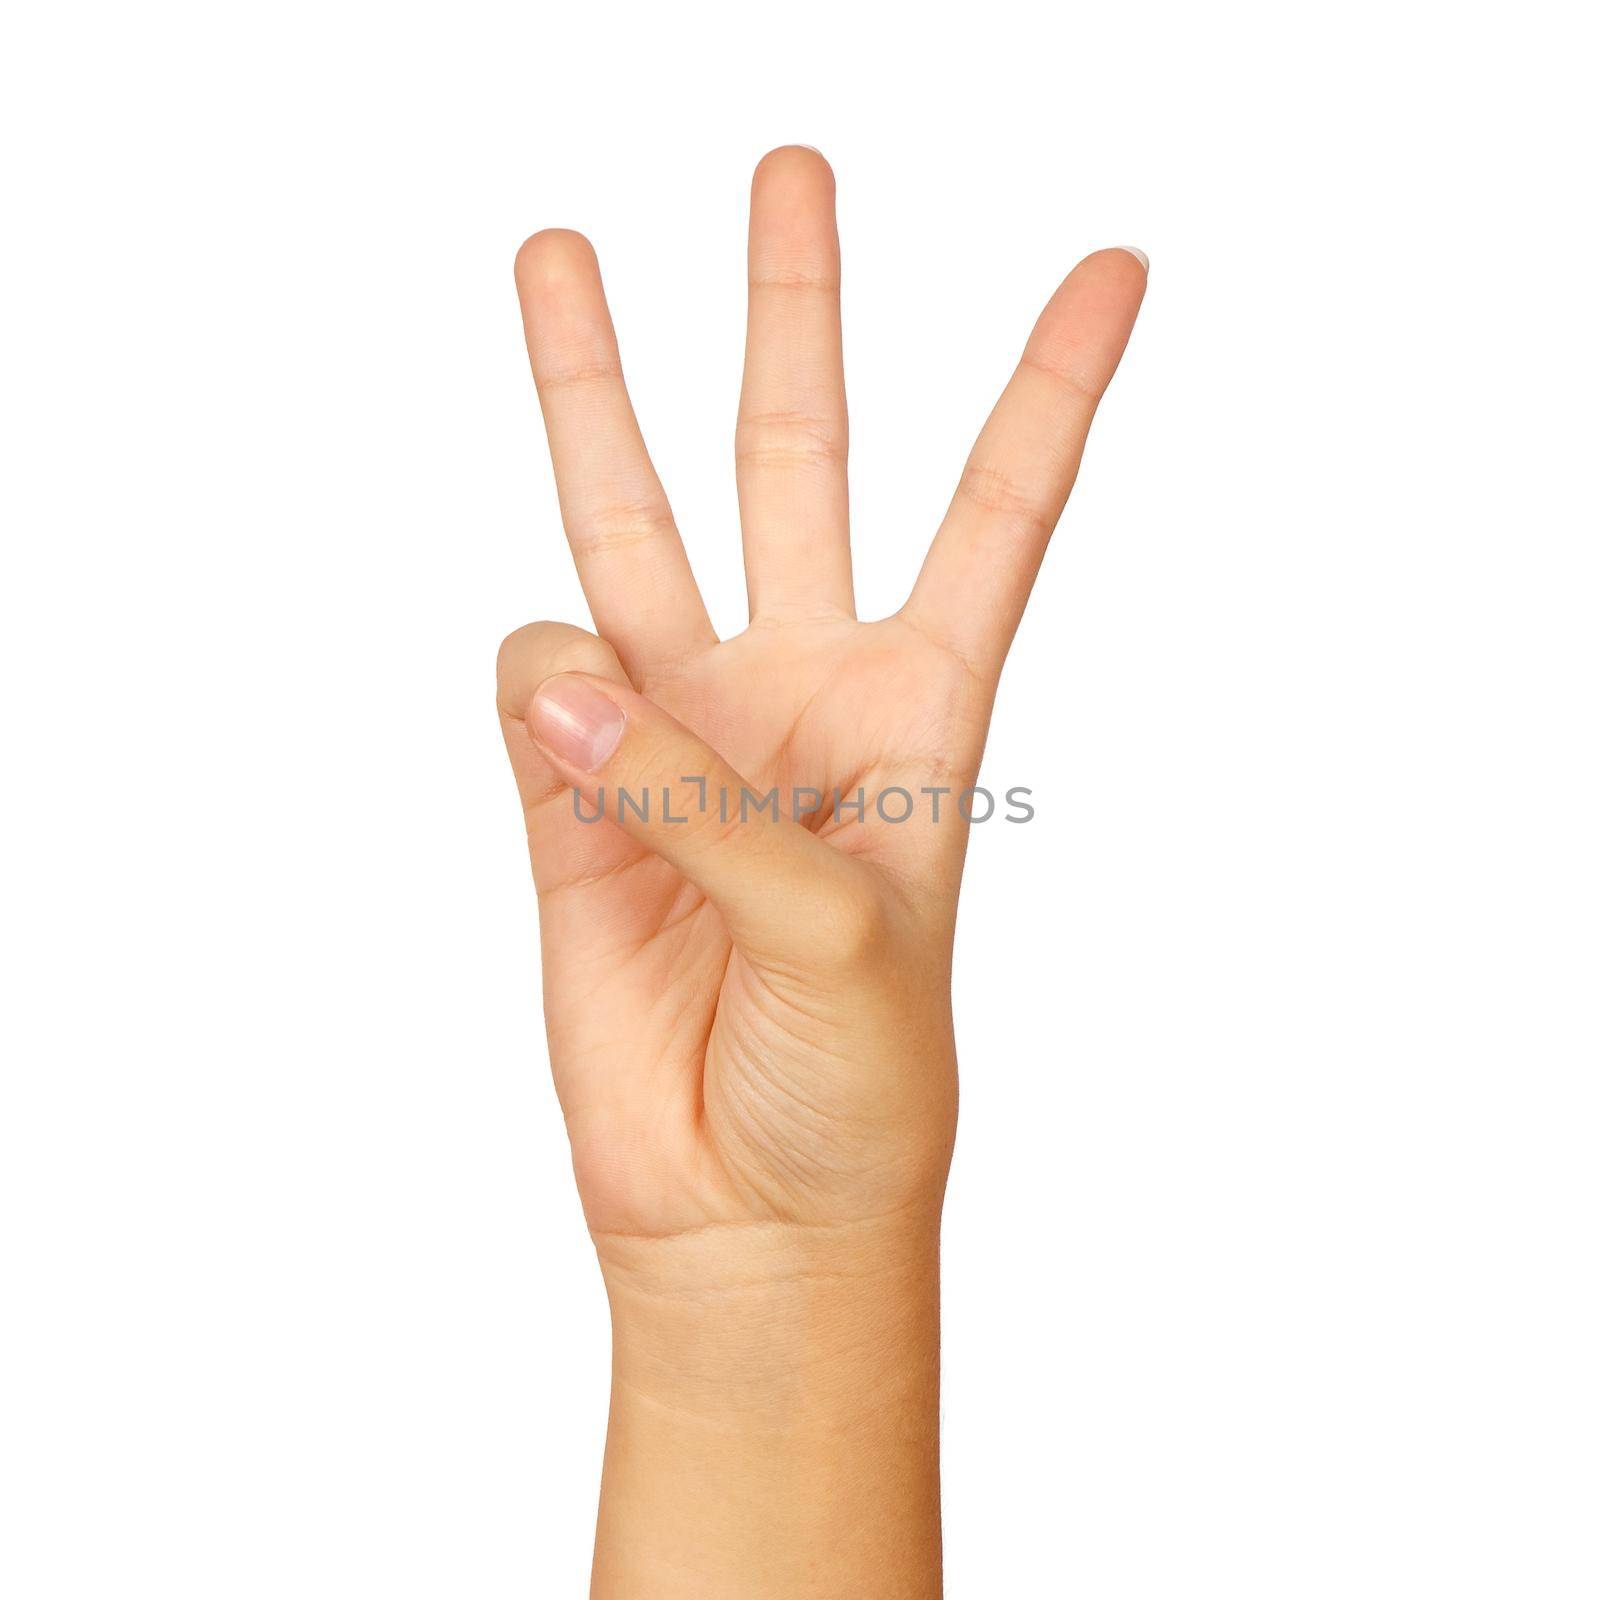 american sign language number 6. female hand gesturing isolated on white background